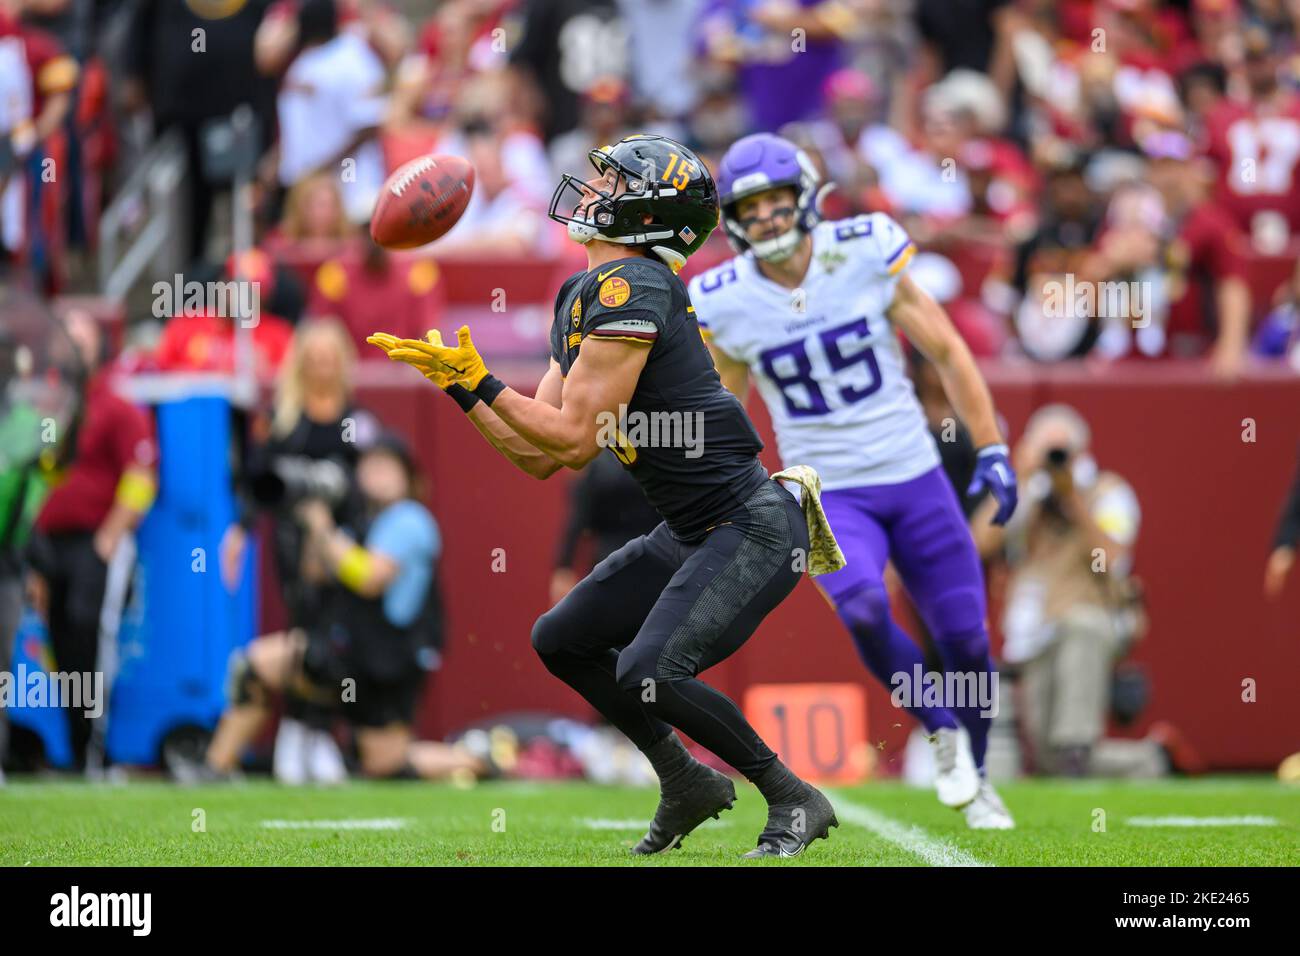 Landover, MD, USA. 6th Nov, 2022. Washington Commanders wide receiver Dax Milne (15) fields a punt during the NFL game between the Minnesota Vikings and the Washington Commanders in Landover, MD. Reggie Hildred/CSM/Alamy Live News Stock Photo